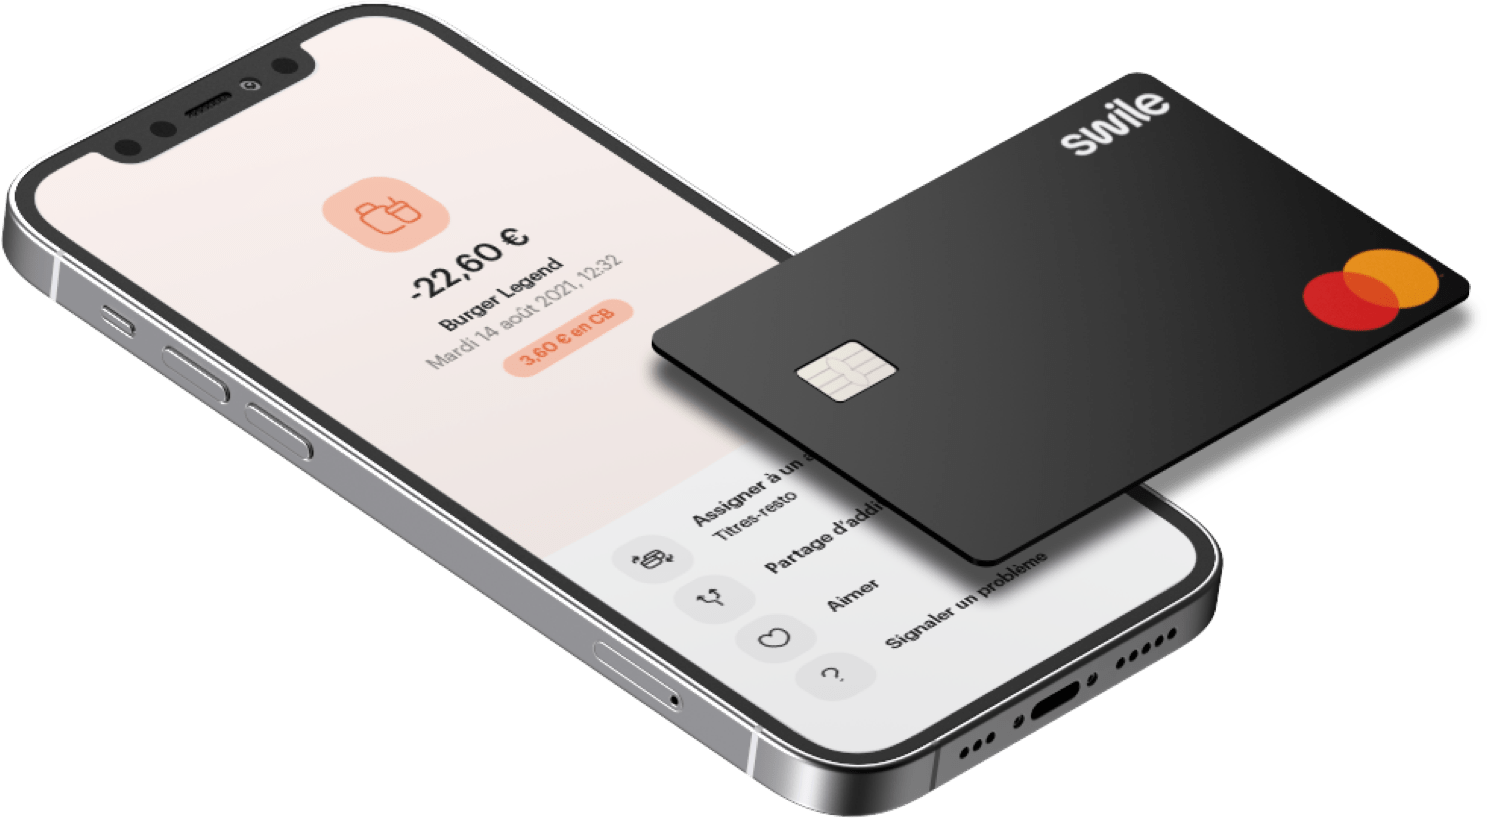 Swile App and card